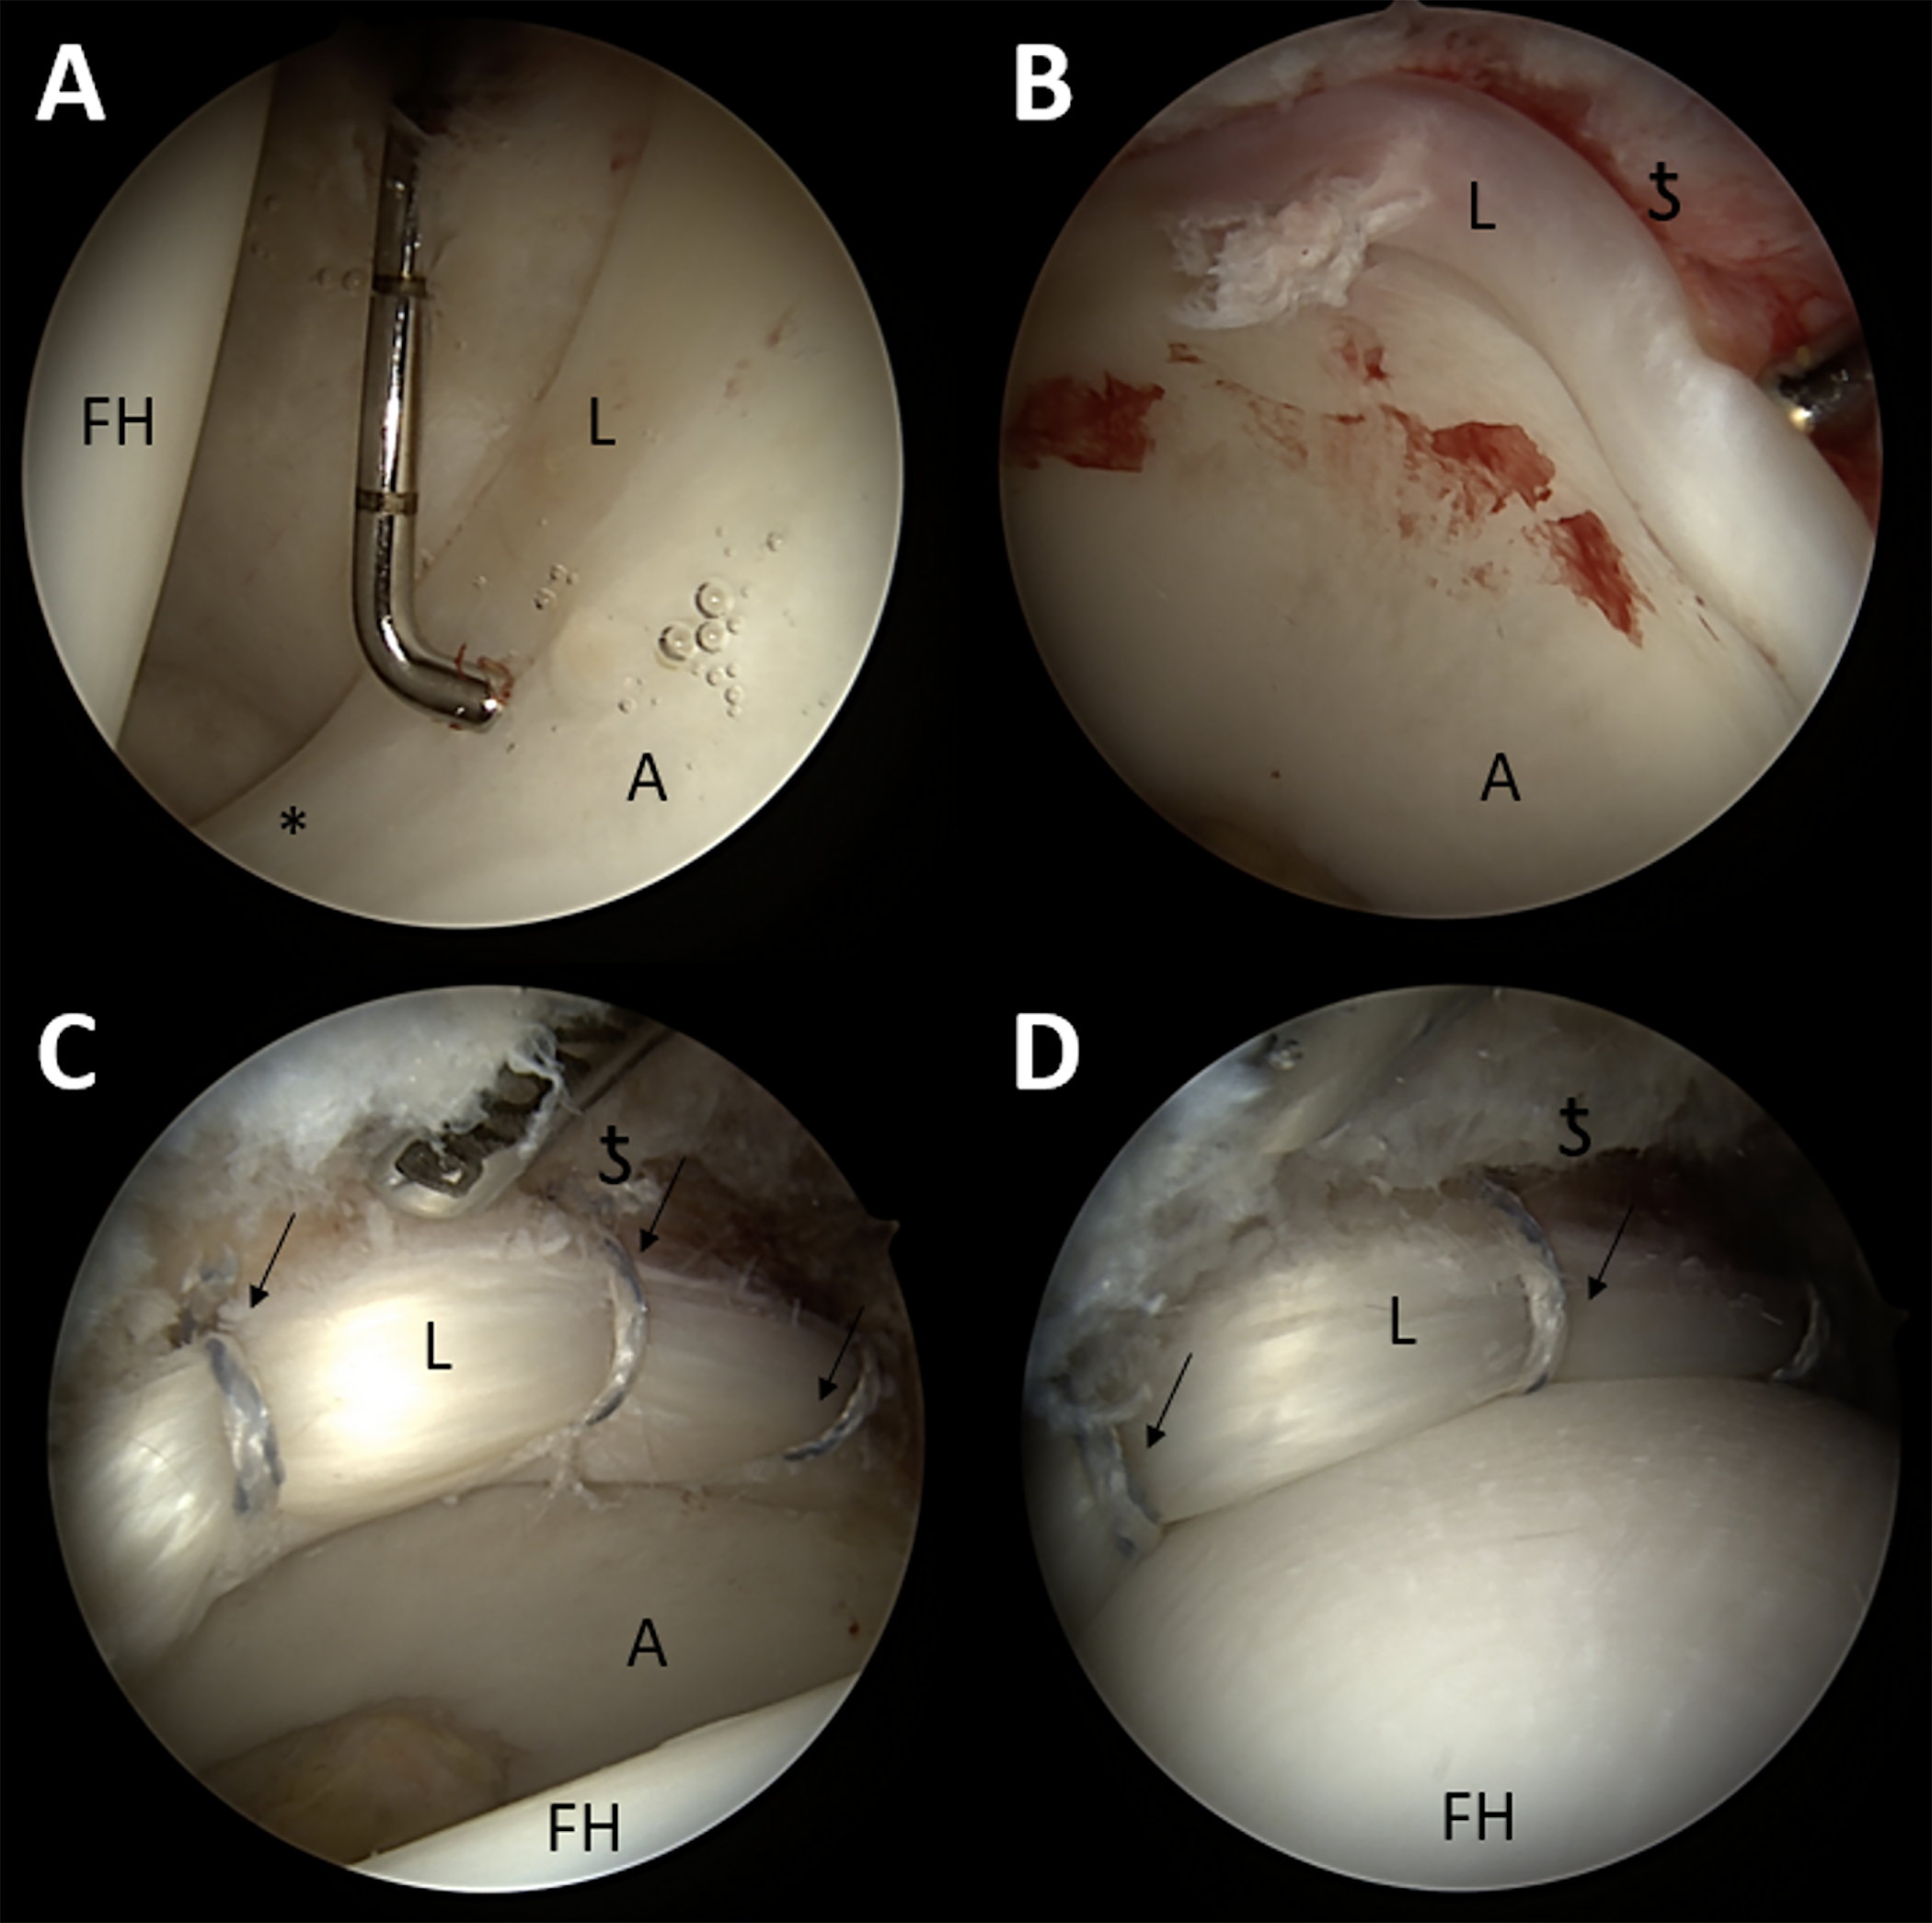 Intraoperative images of labral repair in a left hip with the patient in the supine position. The anterolateral portal was used as a visualization portal for the 70° arthroscope.